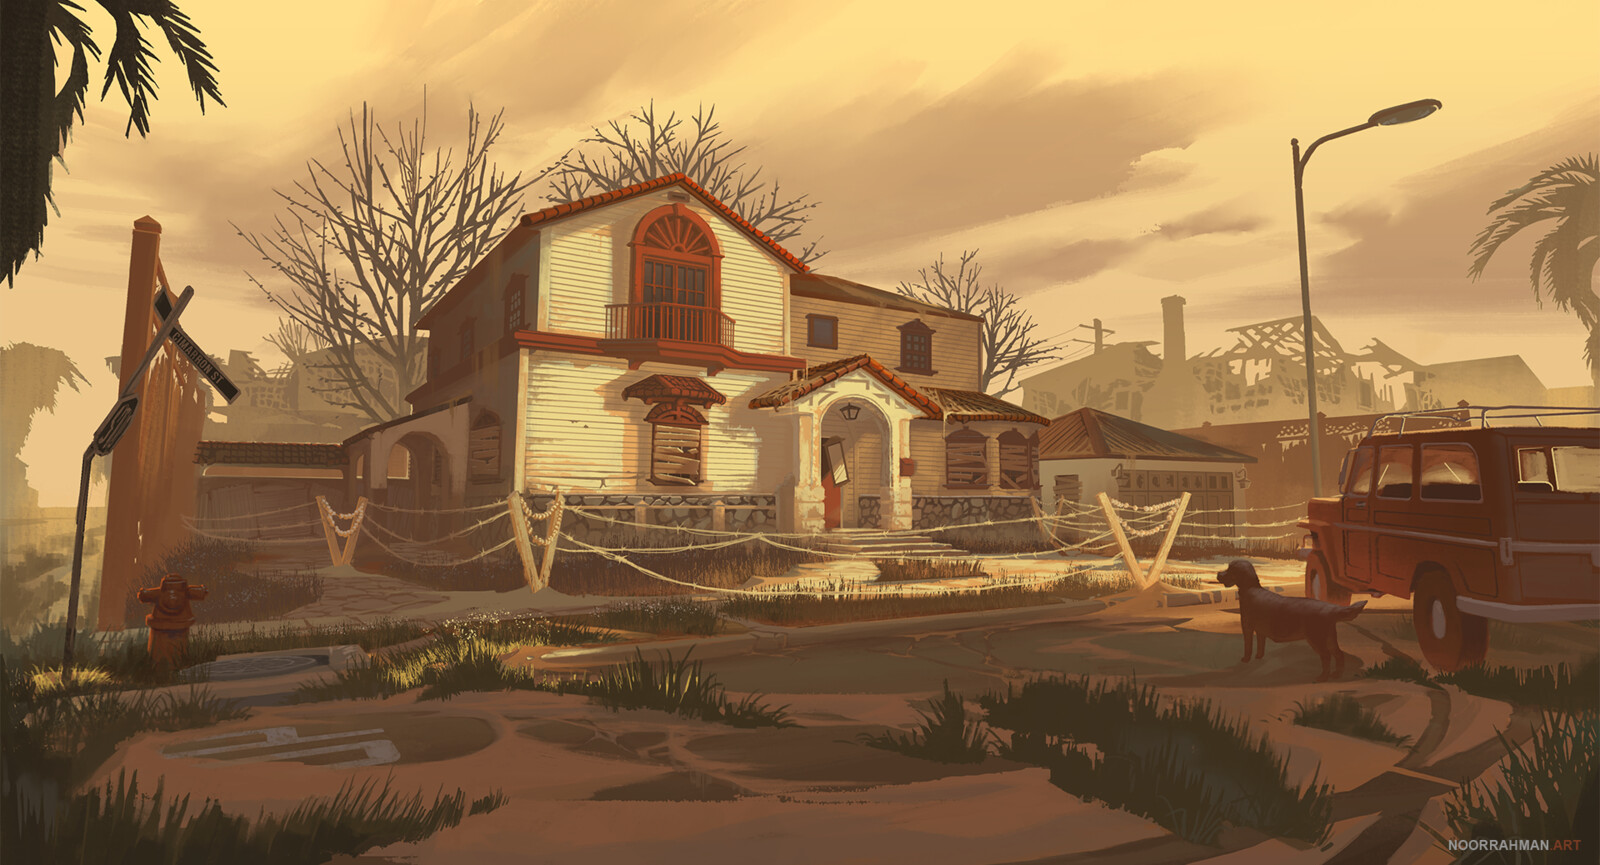 Final background painting. Photoshop.